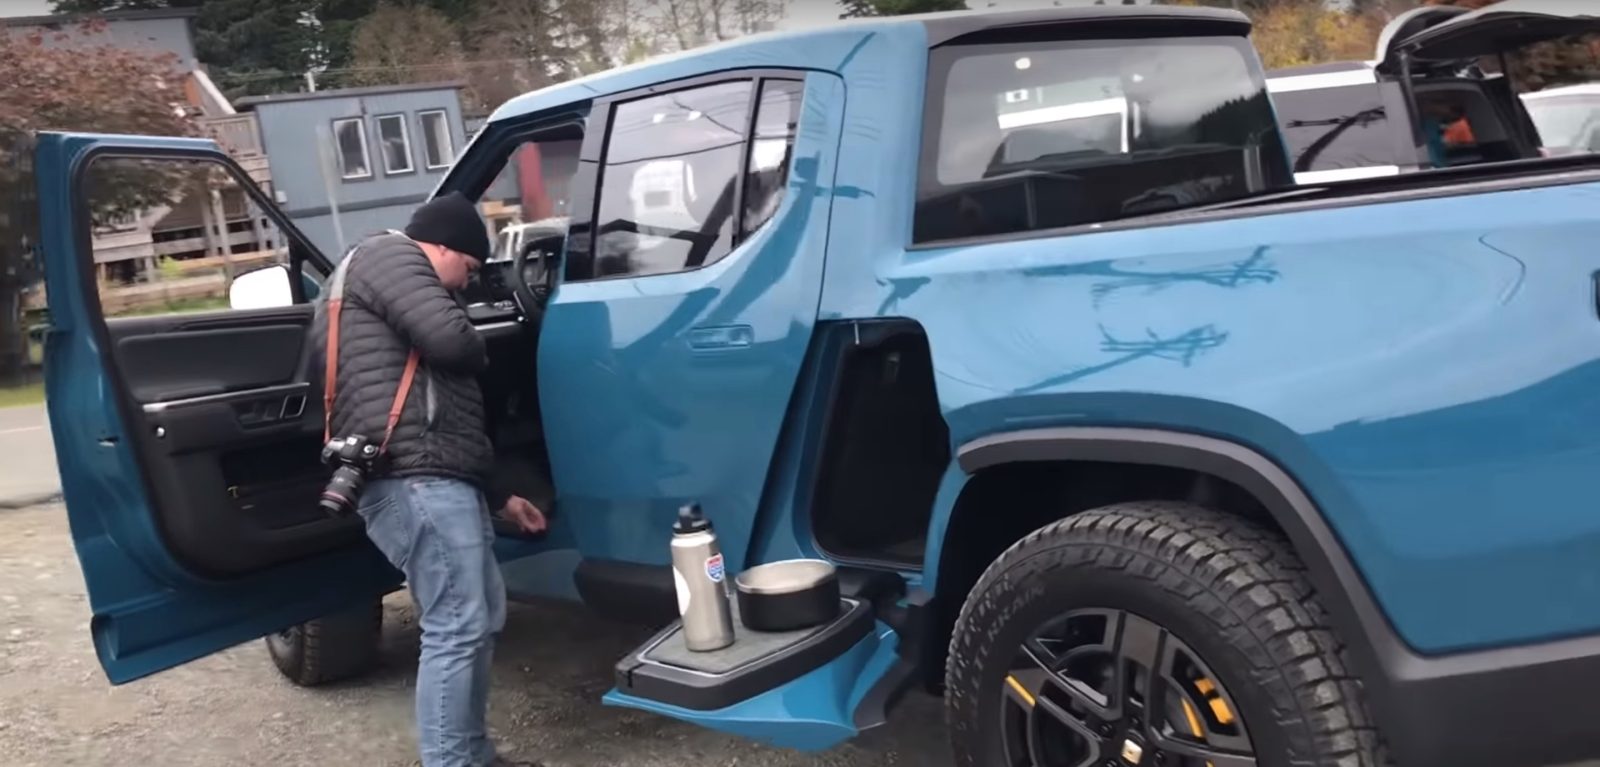 Watch Latest Rivian R1t Electric Pickup Prototype Spotted